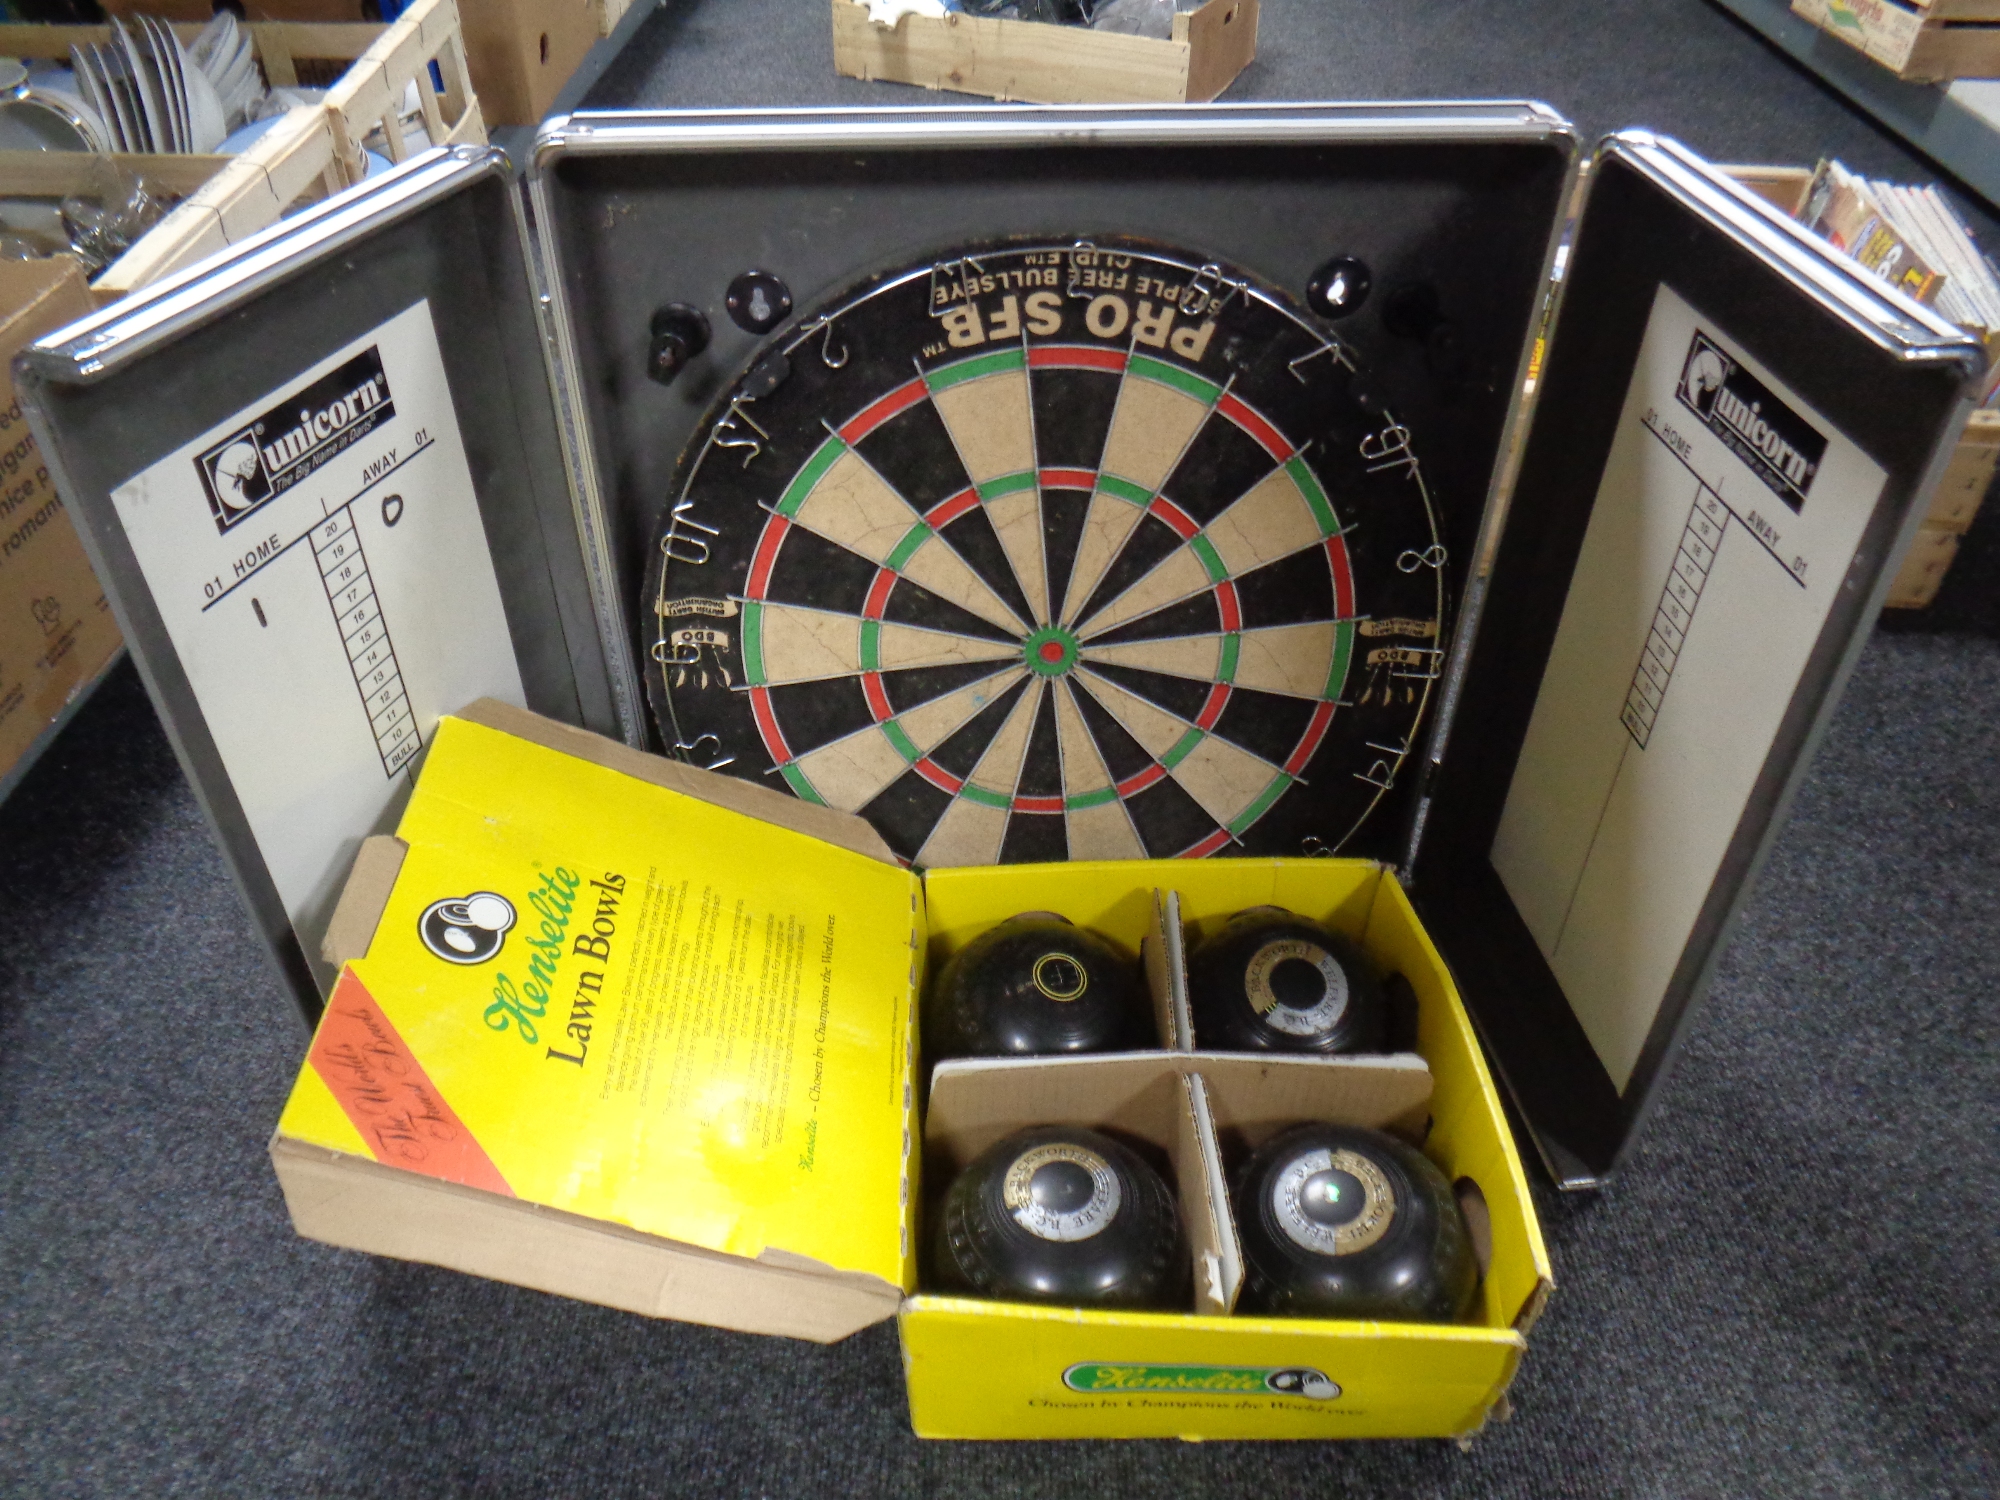 A Unicorn dartboard in case together with a boxed set of four Henselite lawn balls